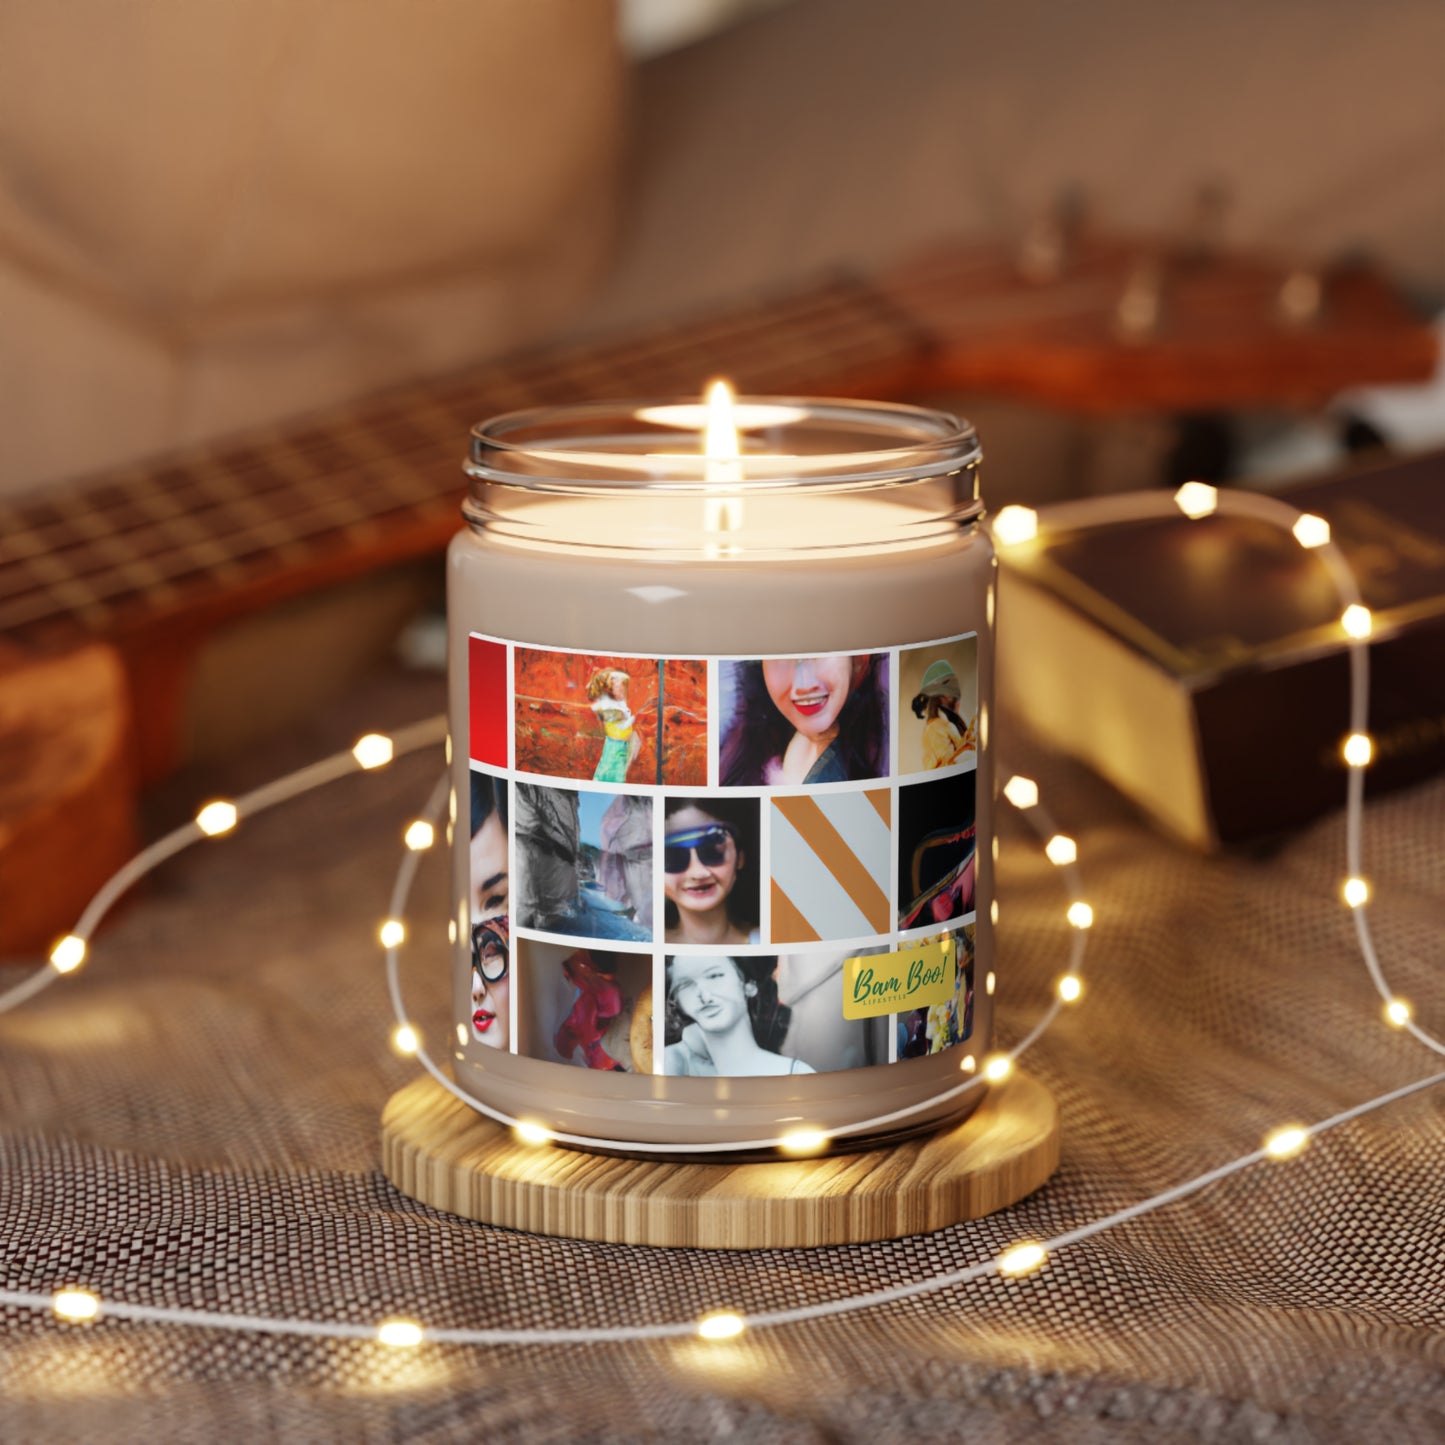 "My Reflection Digital Collage" - Bam Boo! Lifestyle Eco-friendly Soy Candle